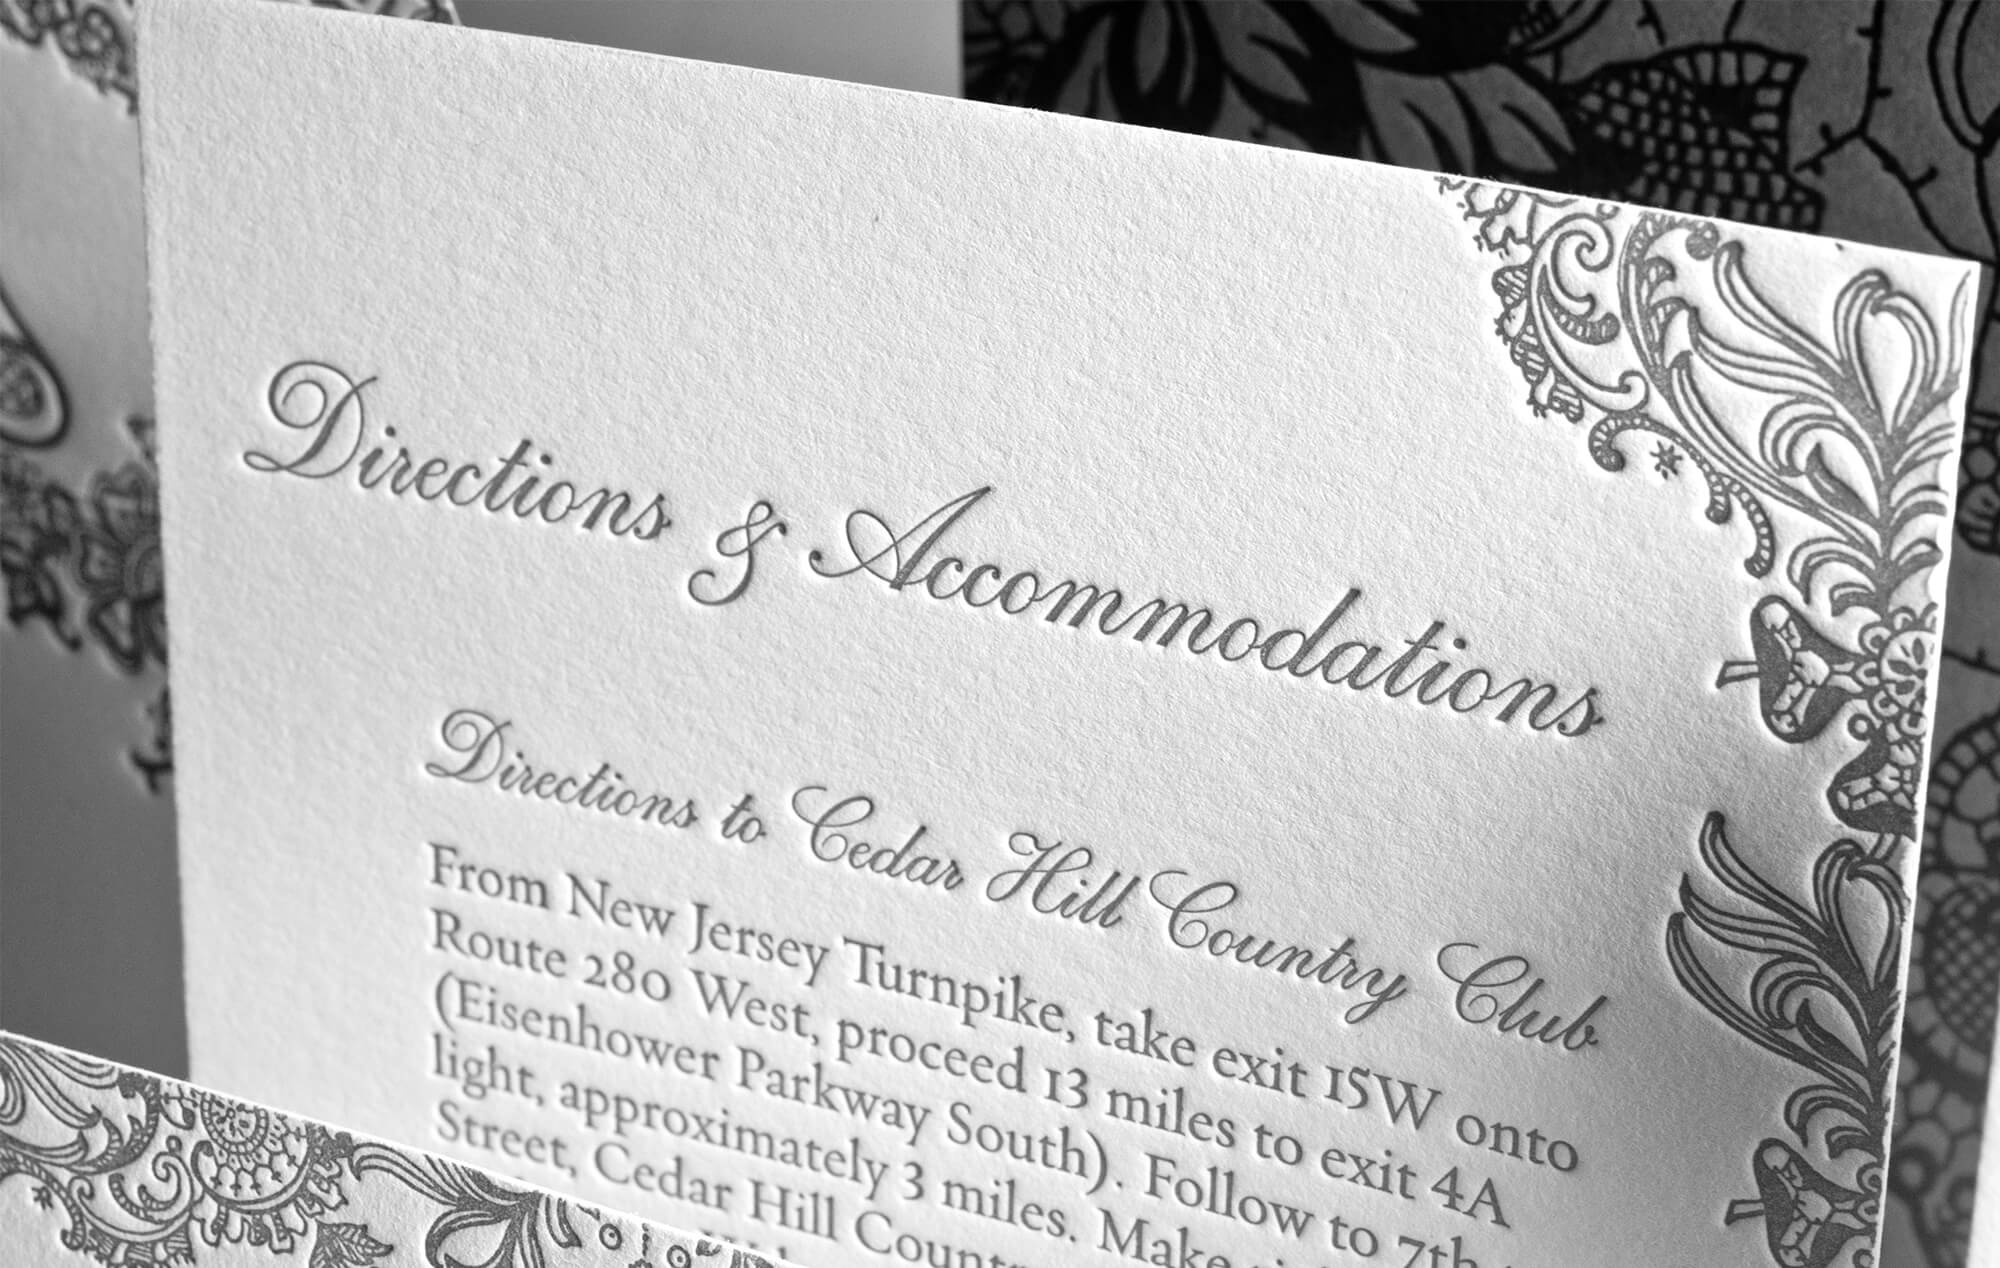 Letterpress directions and accommodations cards